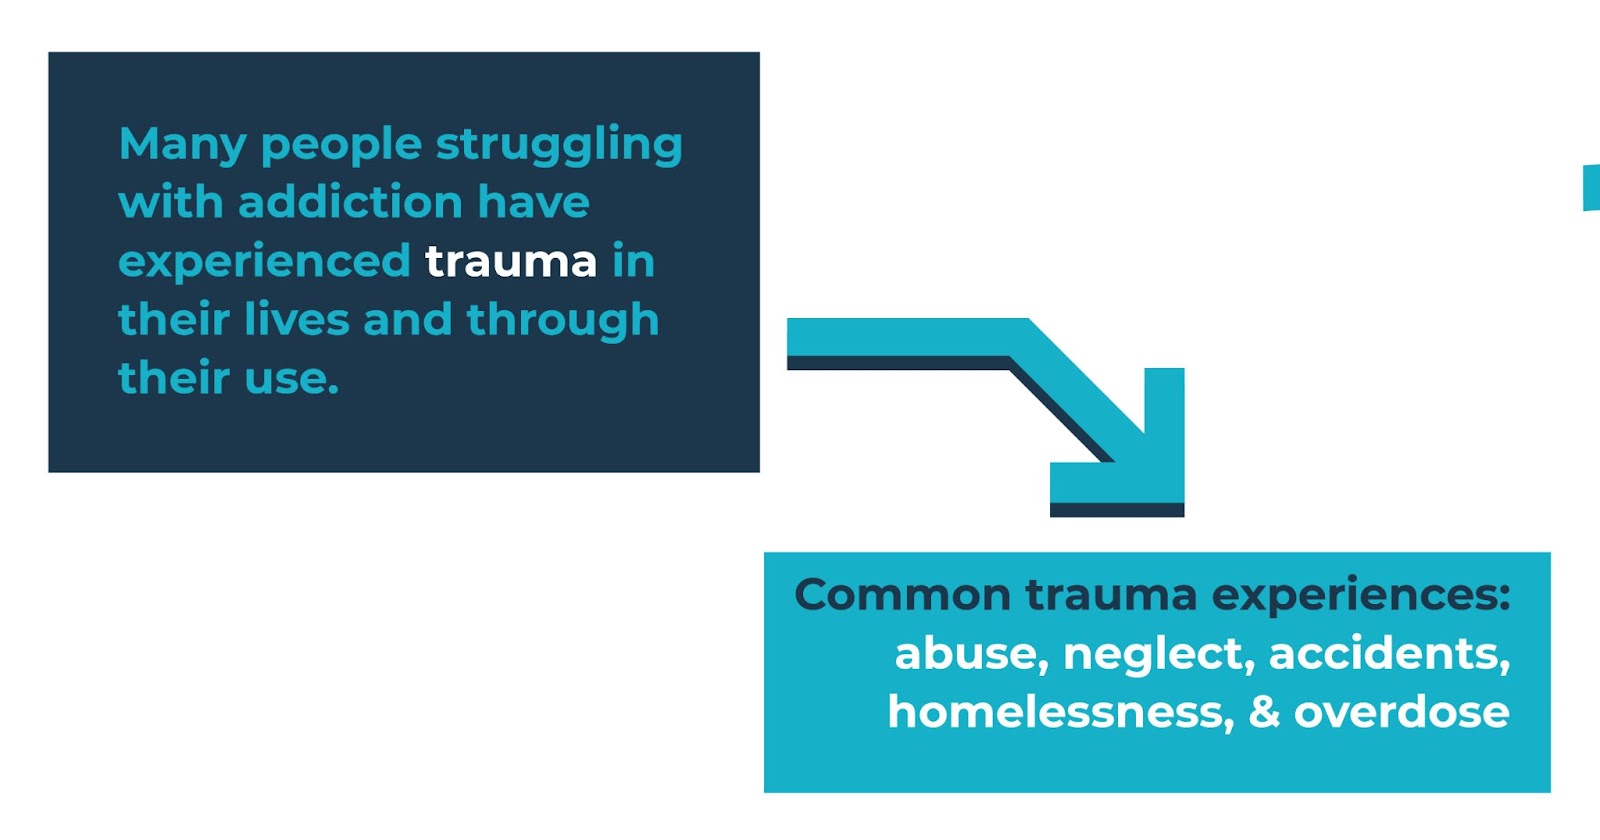 many people struggling with addiction have experienced trauma in their lives and through their use. common trauma experiences: abuse, neglect, accidents, homelessness, and overdose